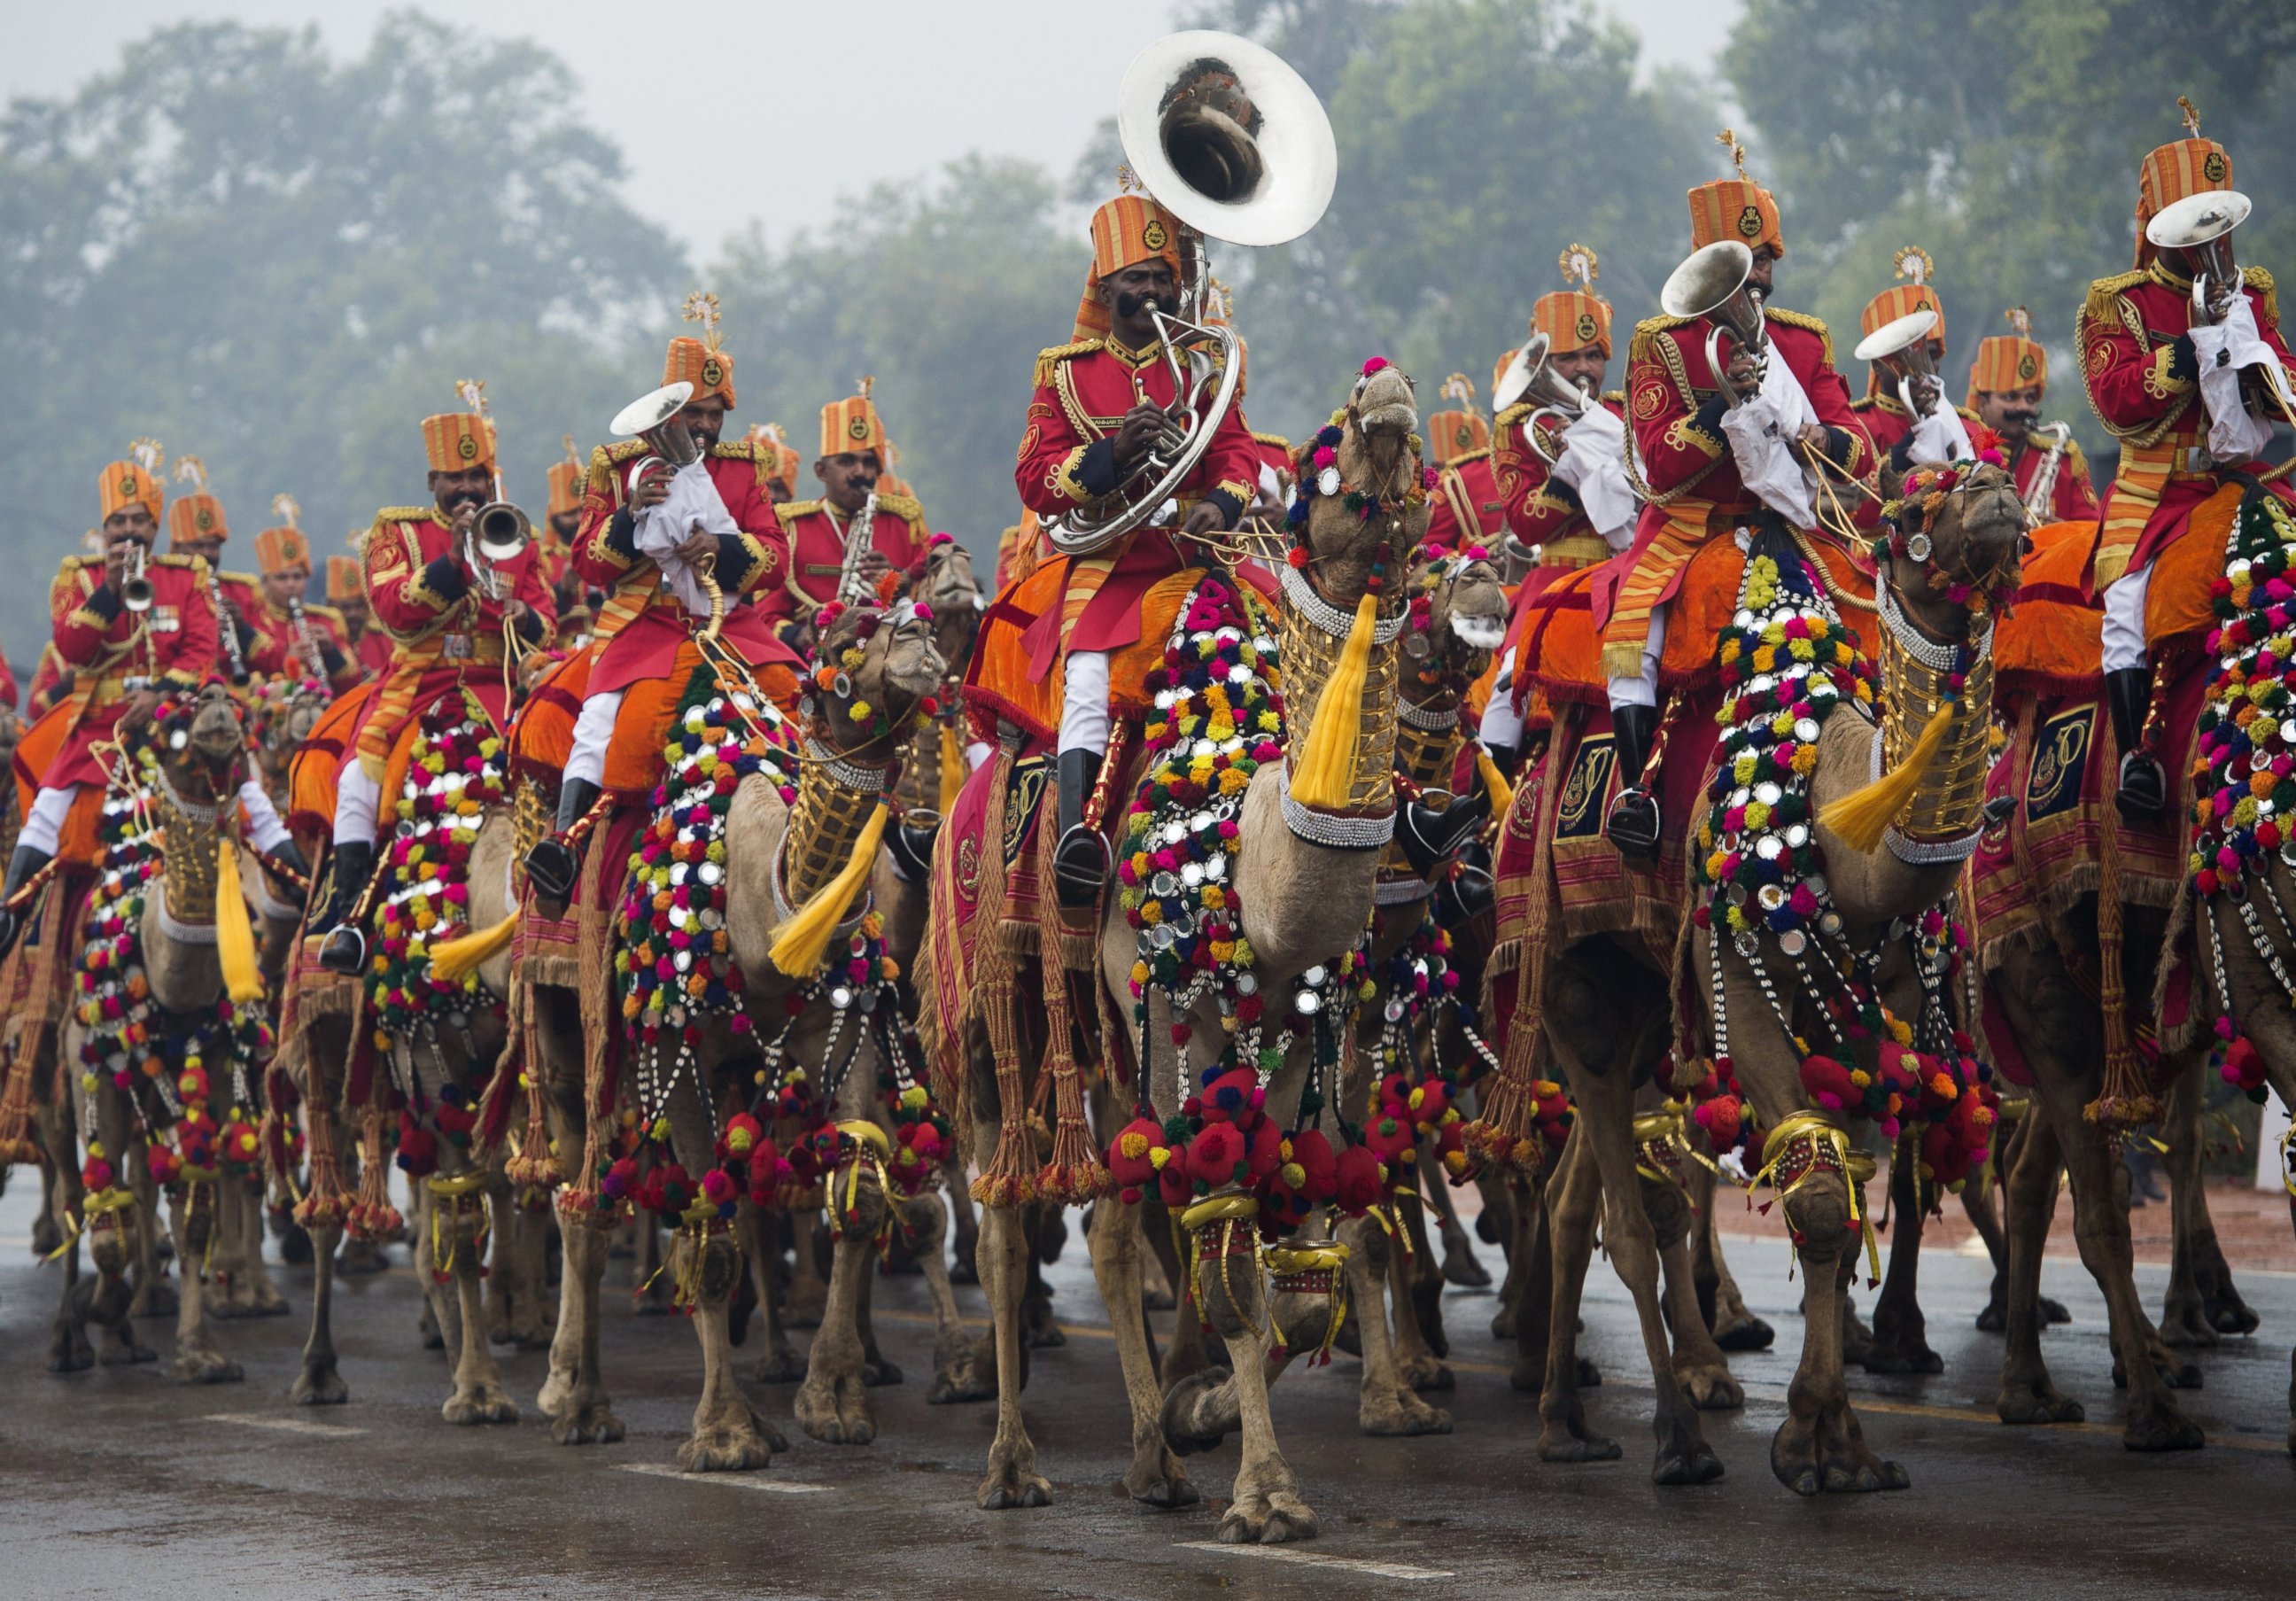 PHOTO: An Indian military band plays while riding camels during the nation's Republic Day Parade in New Delhi on January 26, 2015.